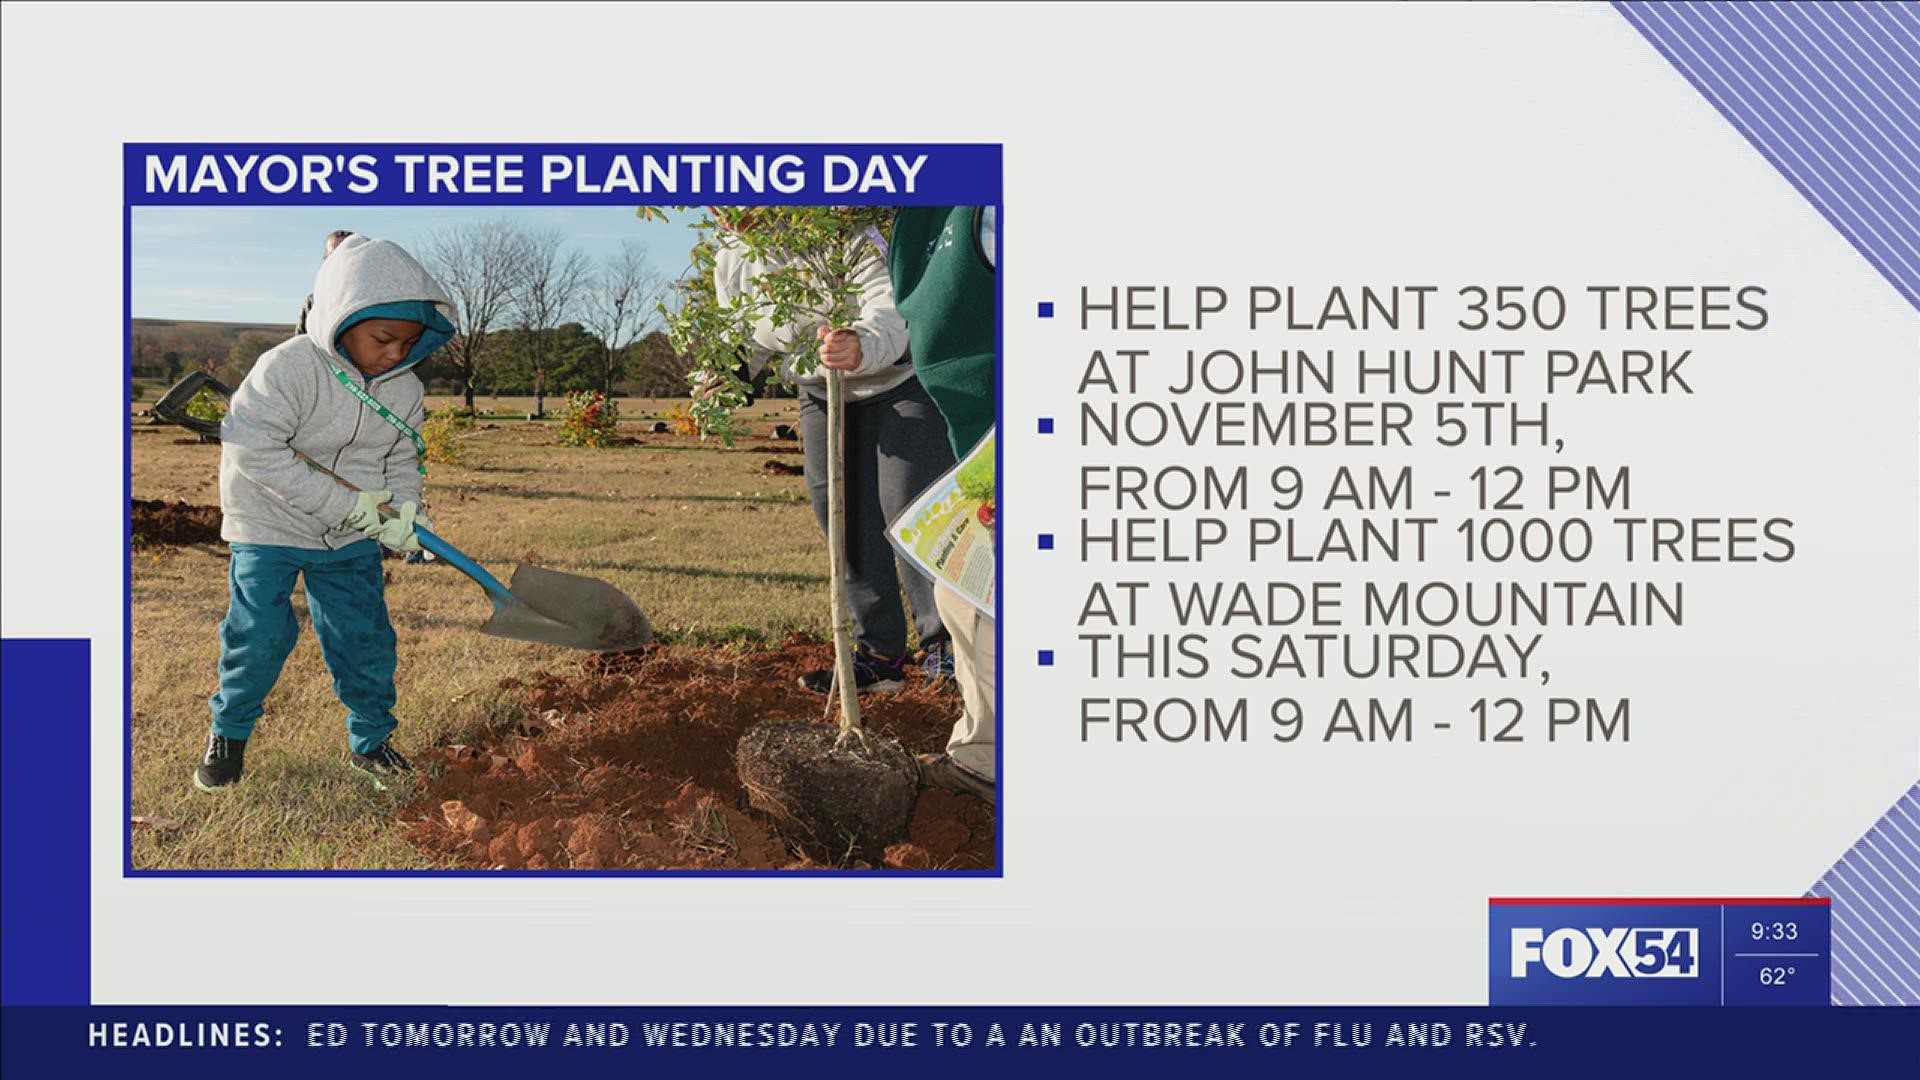 Join Mayor Battle and Huntsville's Green Team to plant 350 trees at John Hunt Park from 9:00am-12:00pm on November 5.